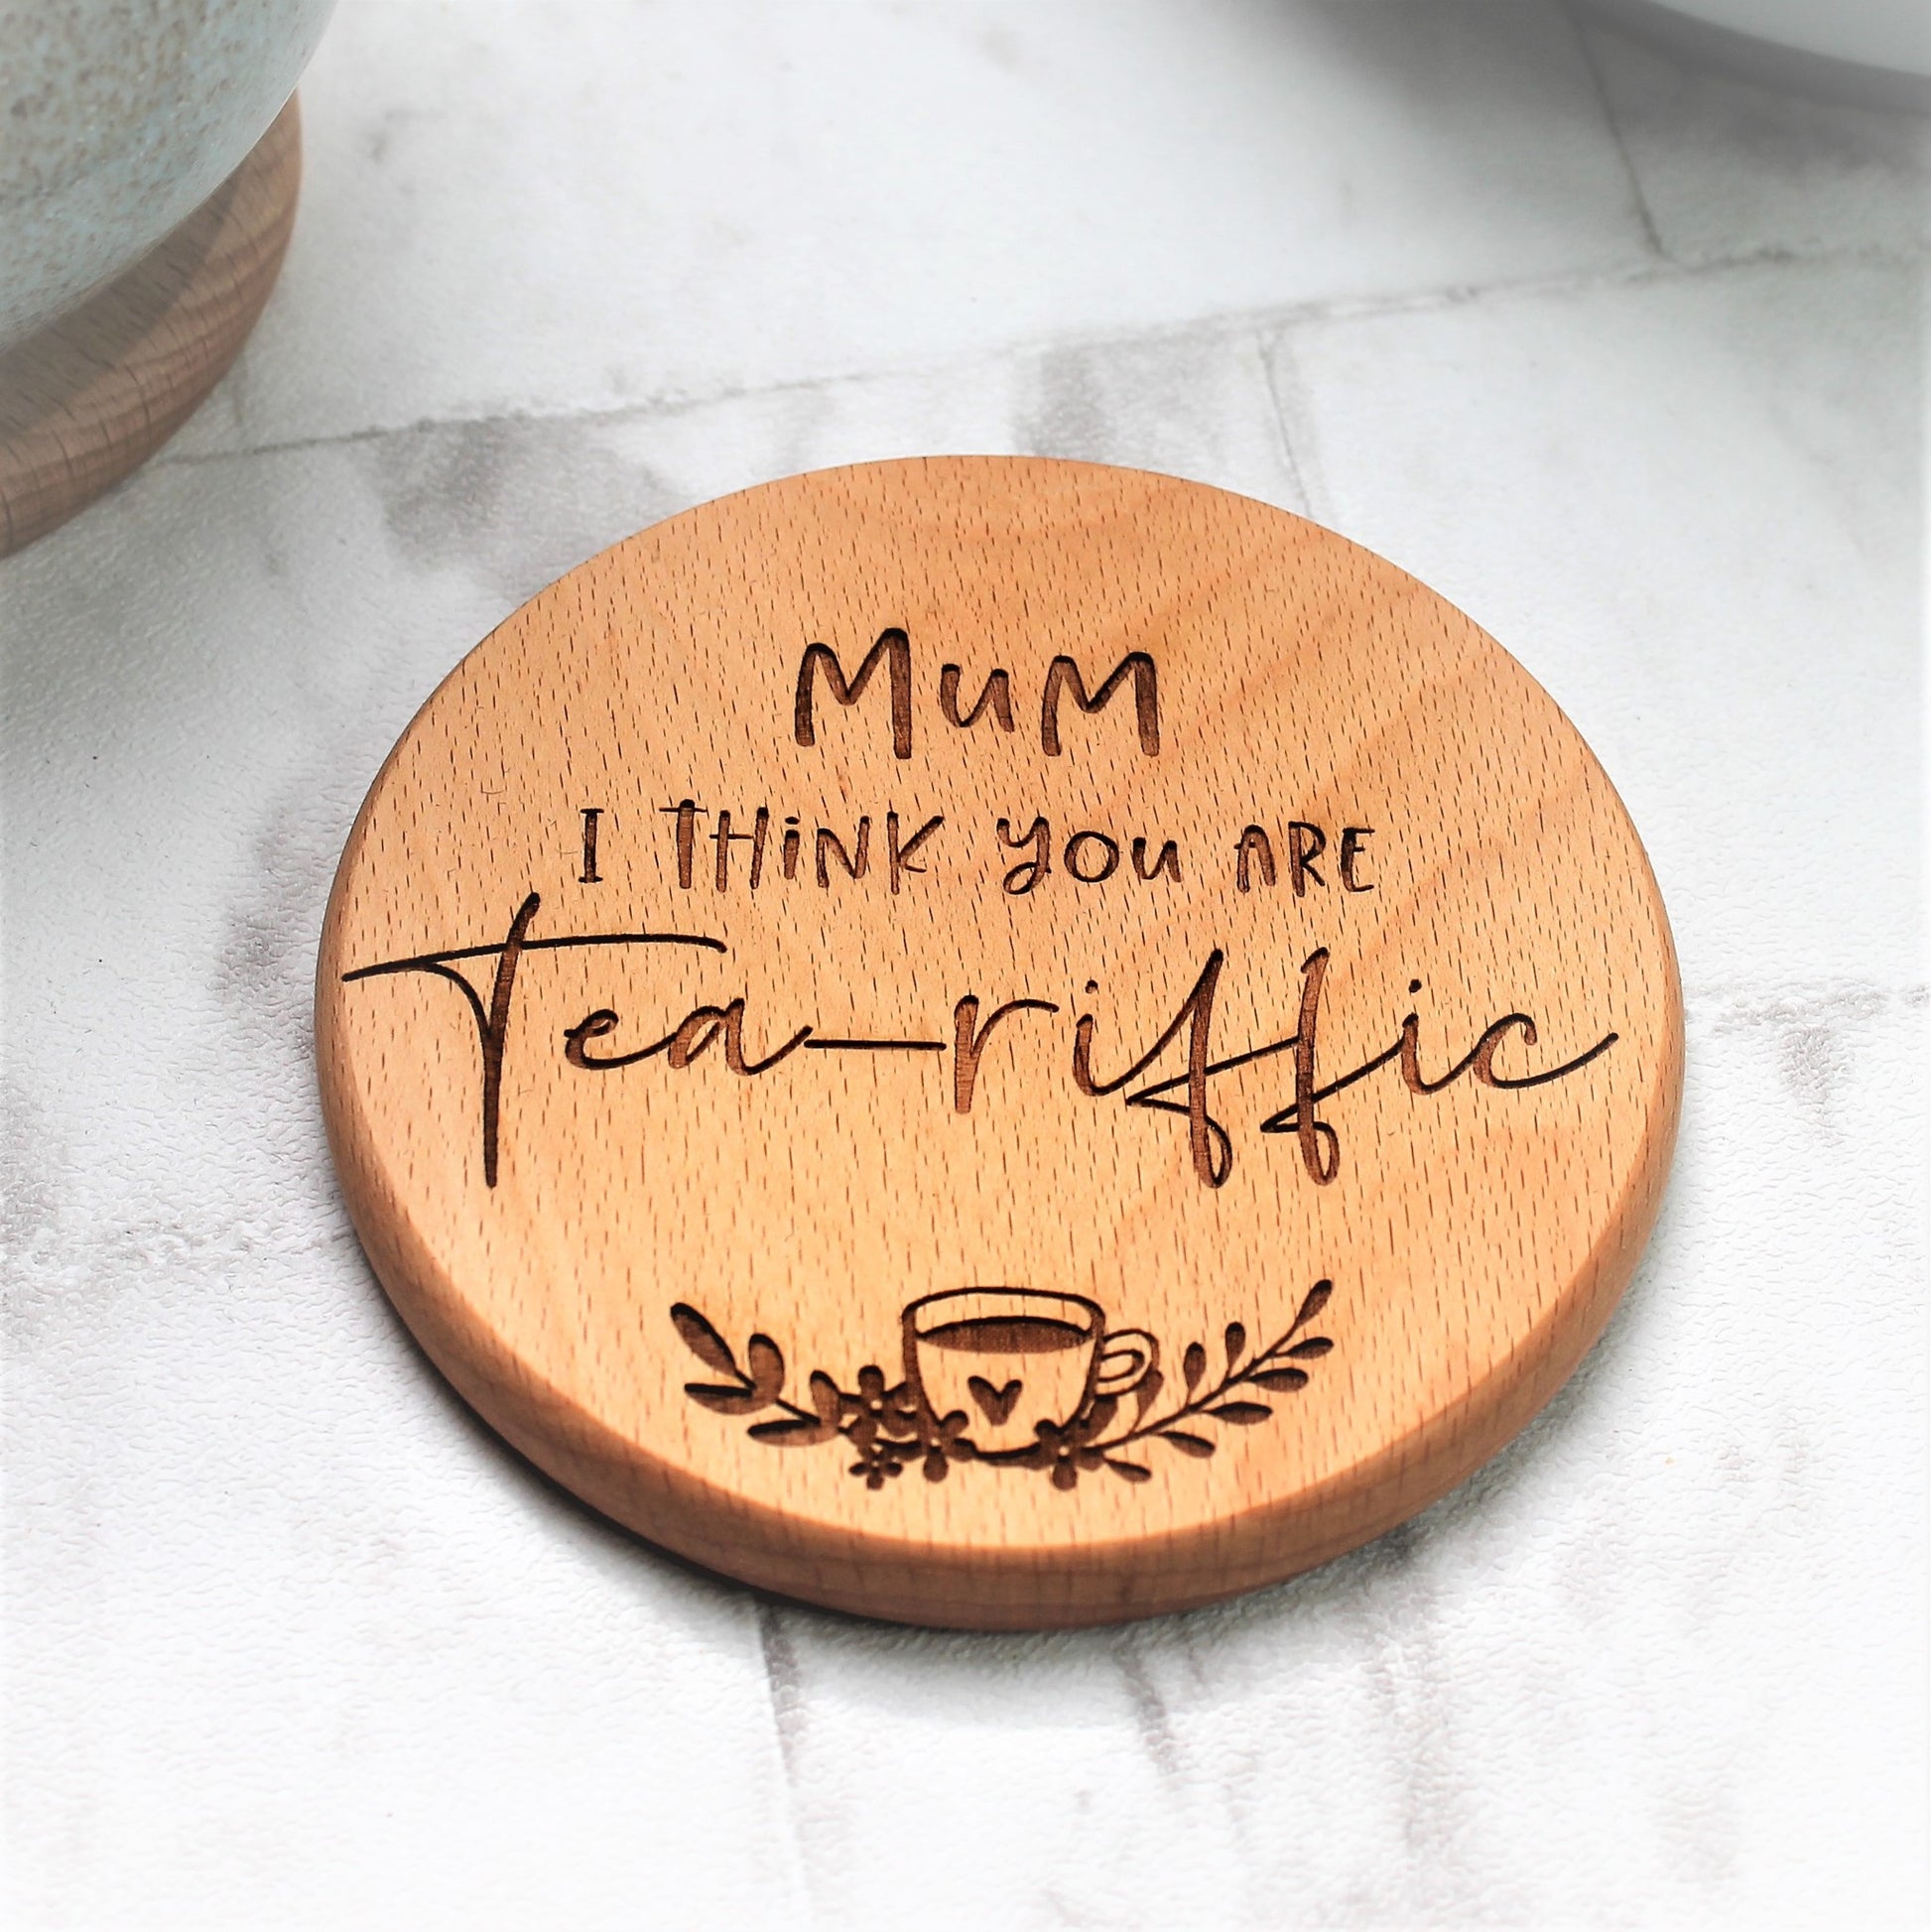 mum you are tea-riffic wooden personalised coaster 